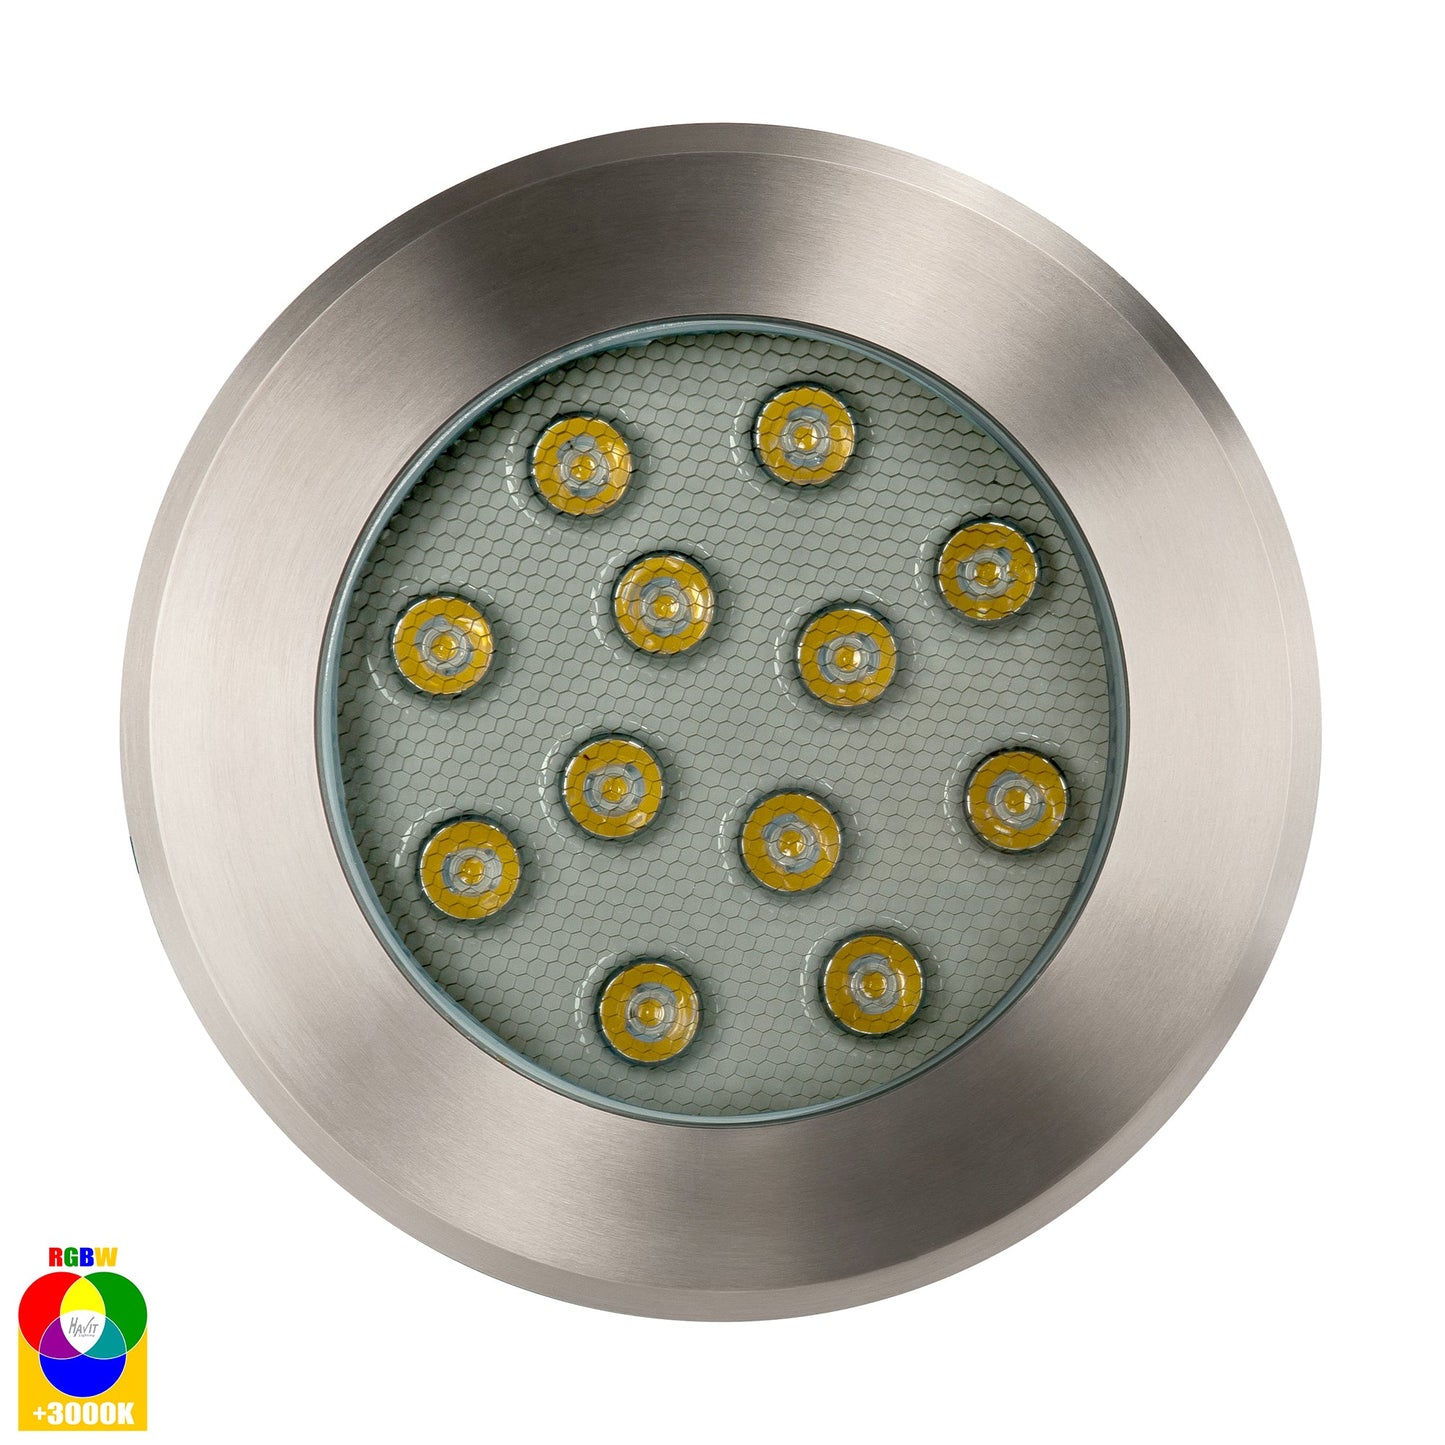 In-Ground Uplighter Round, 210mm Face, 316 Stainless Steel  HV1843rgbw